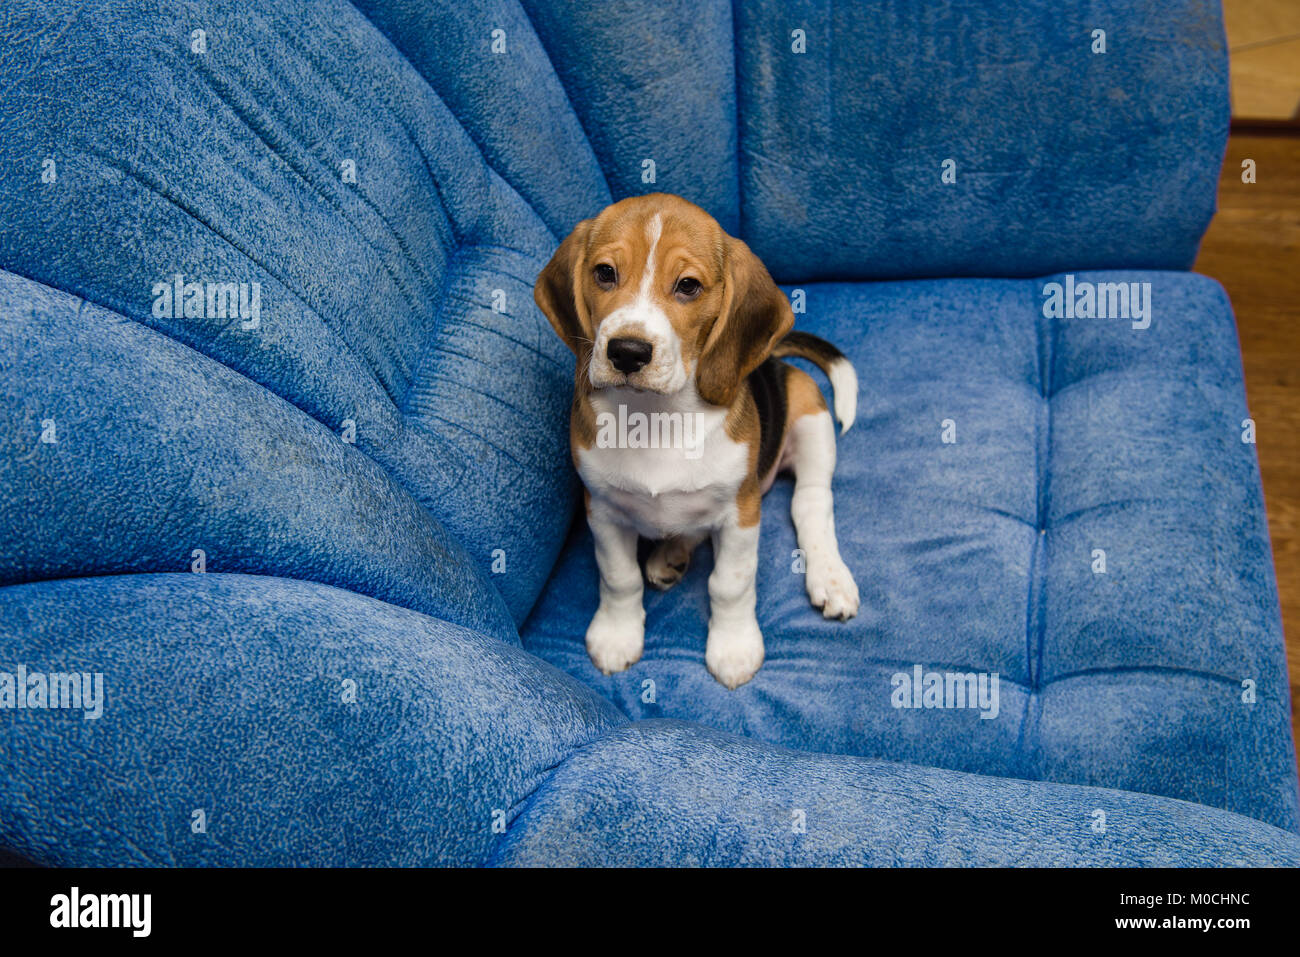 Beagle dog posing in soft blue chair indoors Stock Photo